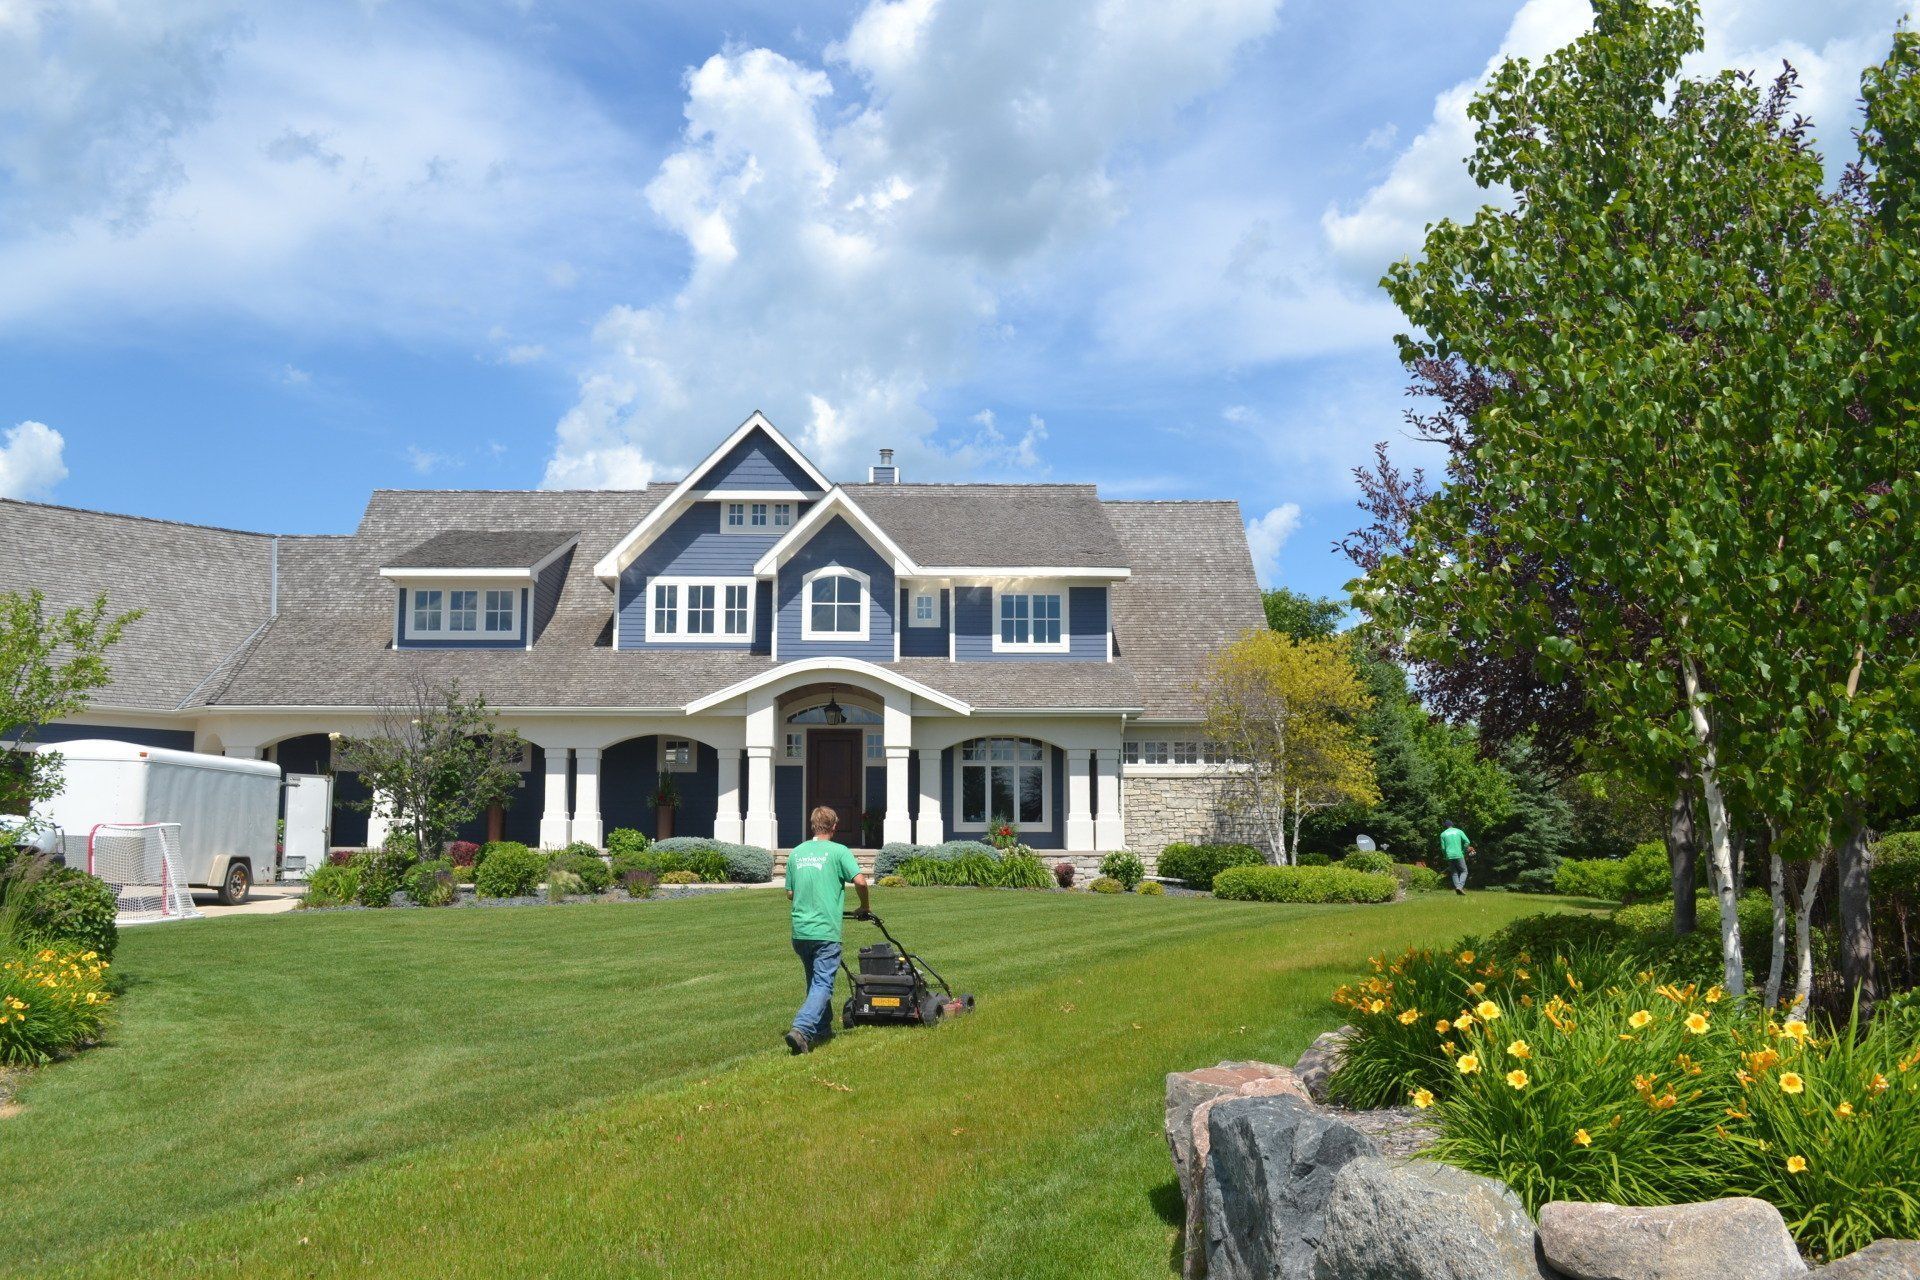 a man is mowing the grass in front of a large house